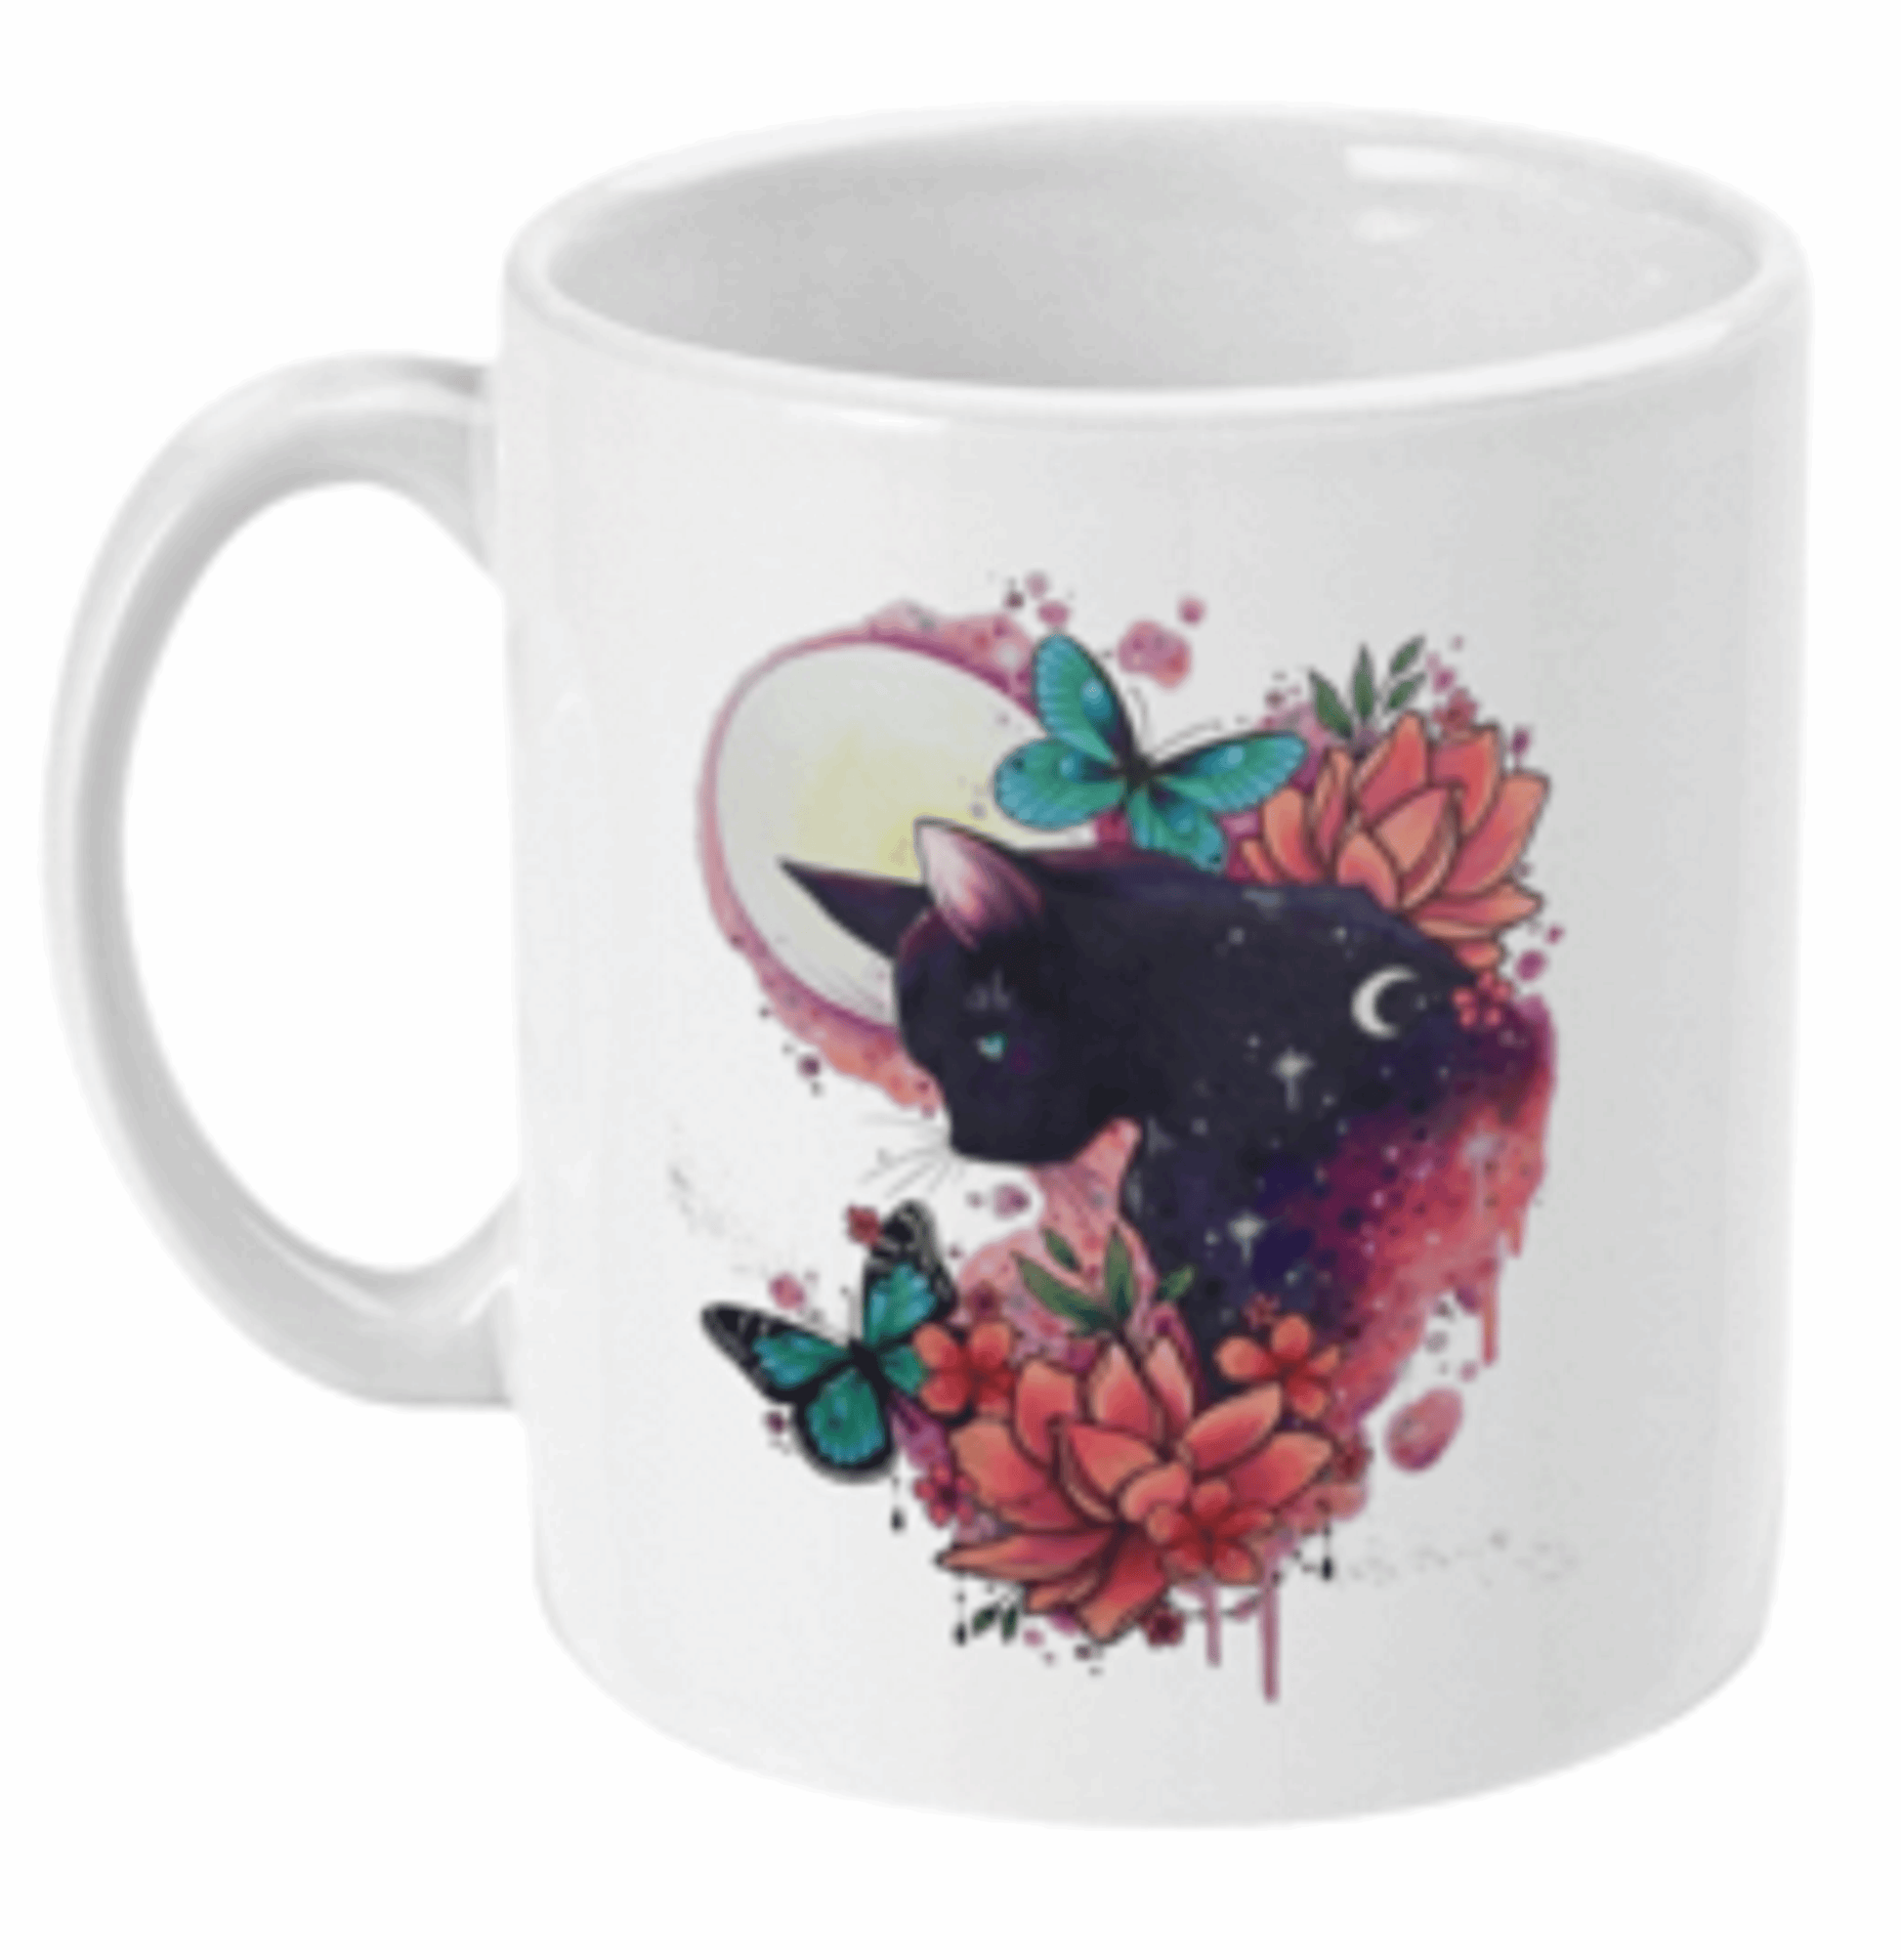  Cat and Butterfly Coffee or Tea Mug by Free Spirit Accessories sold by Free Spirit Accessories